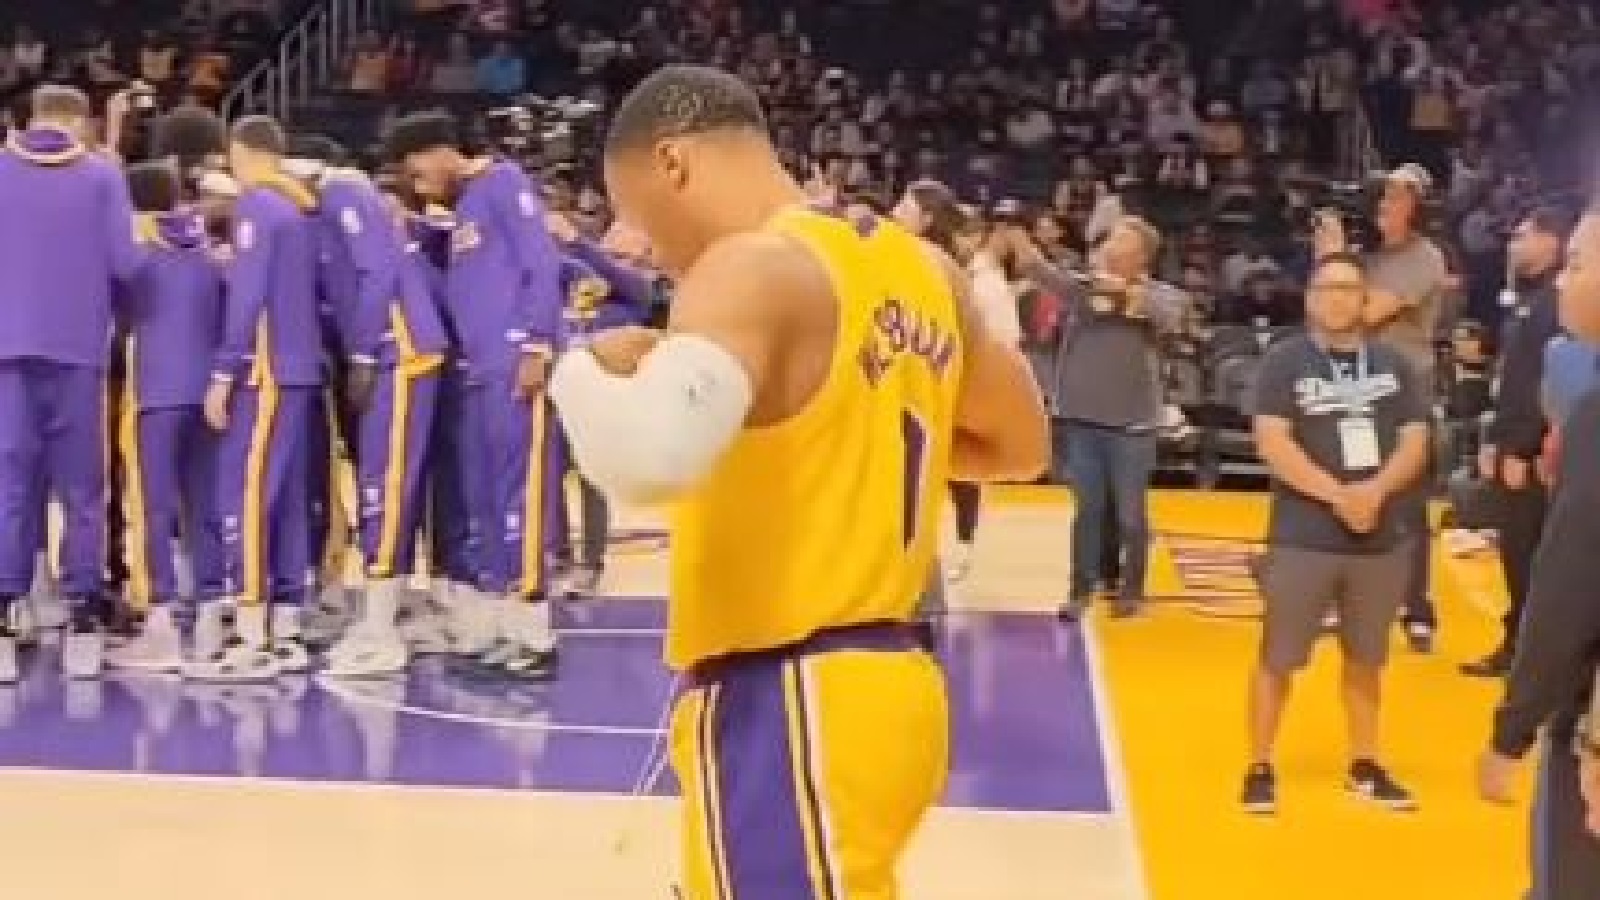 Russell Westbrook seems distant from teammates in Lakers' pre-game ritual:  Is he ok?